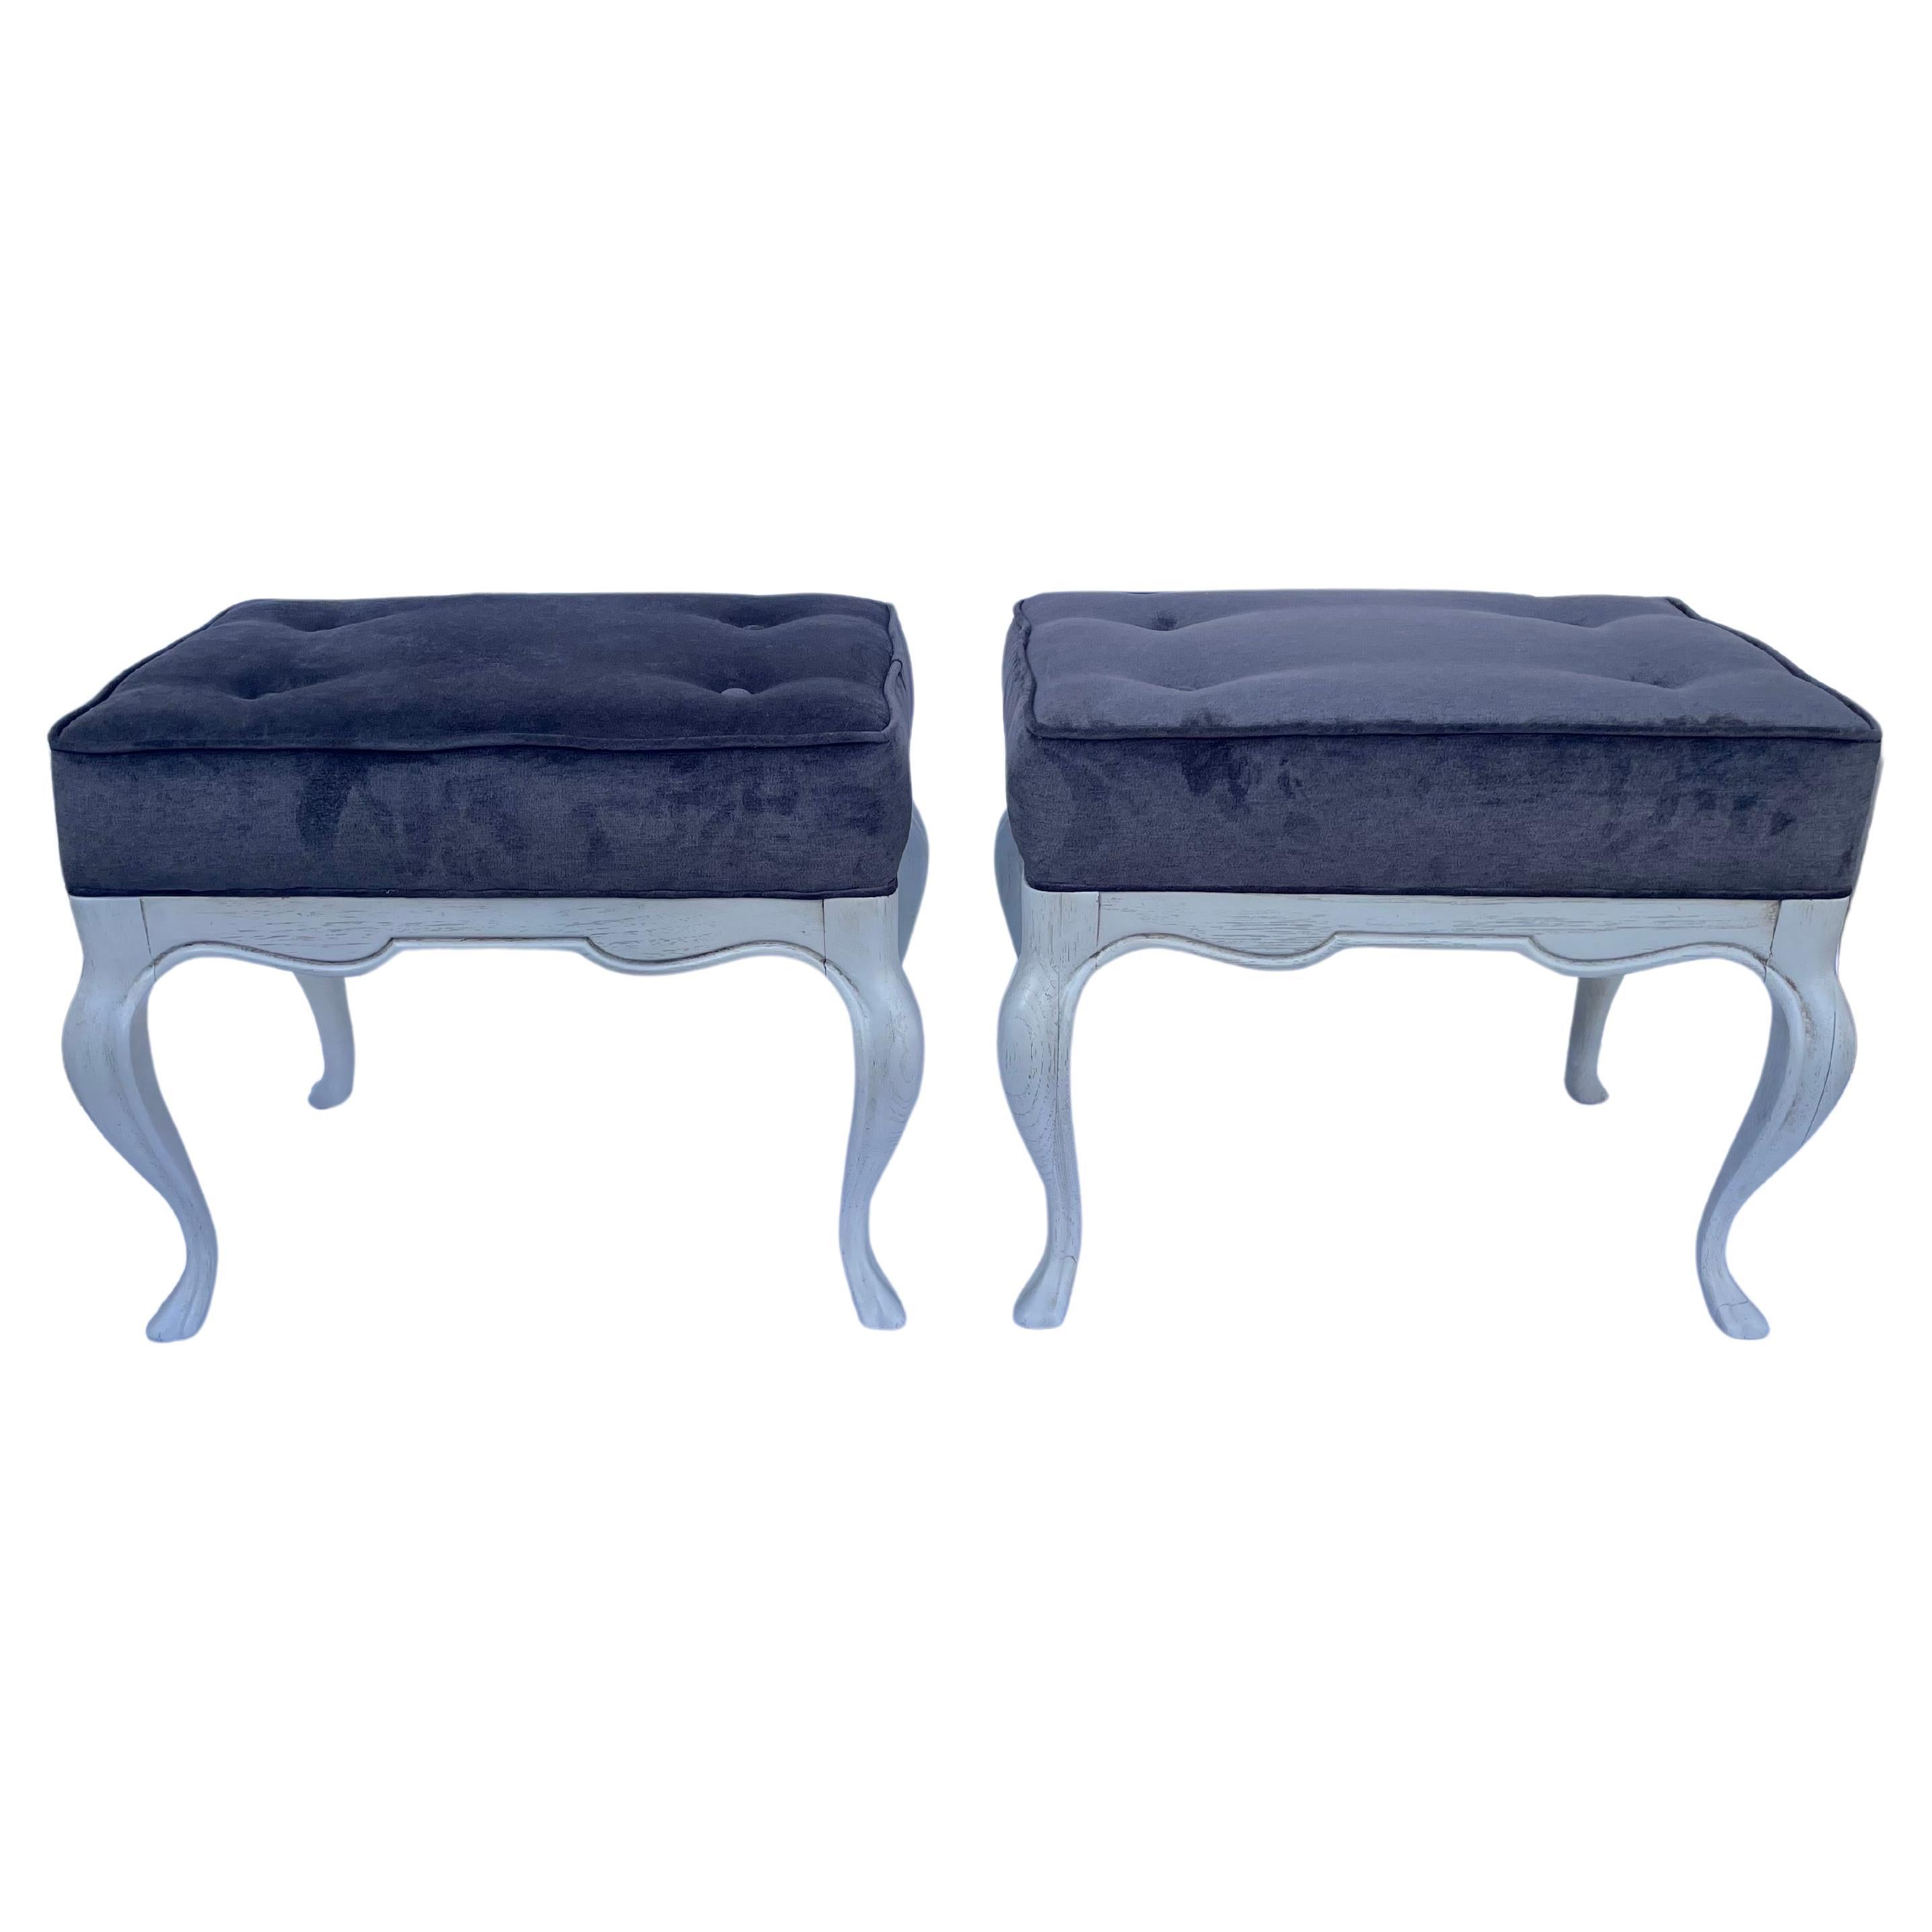 Pair Of Painted Benches. Newly upholstered in charcoal velvet with four buttons and welting. Each measures 21” wide x 15” deep x 17” tall. Benches were repainted at some point. These can be professionally packed and shipped, price depends on